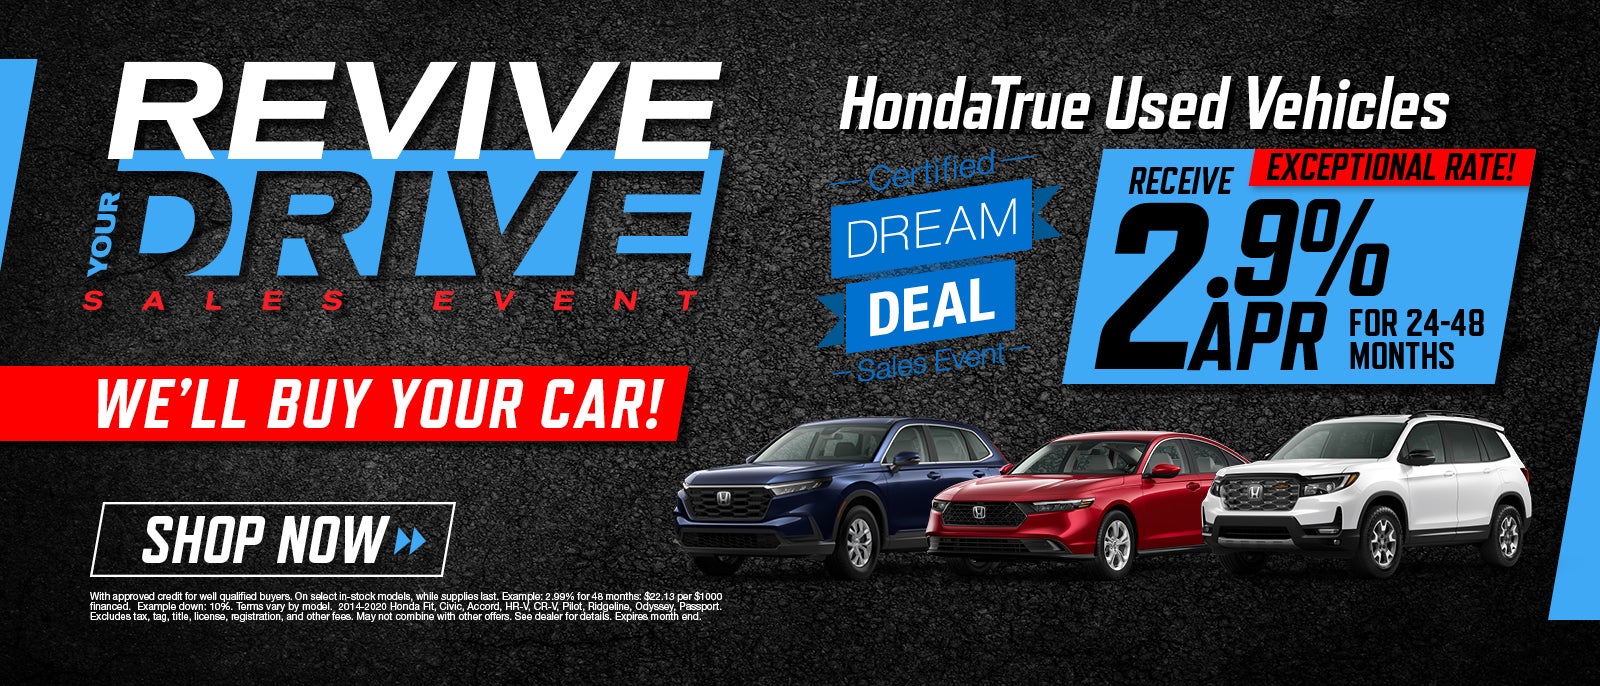 2.9% APR offer Available on HondaTrue Used Vehicles